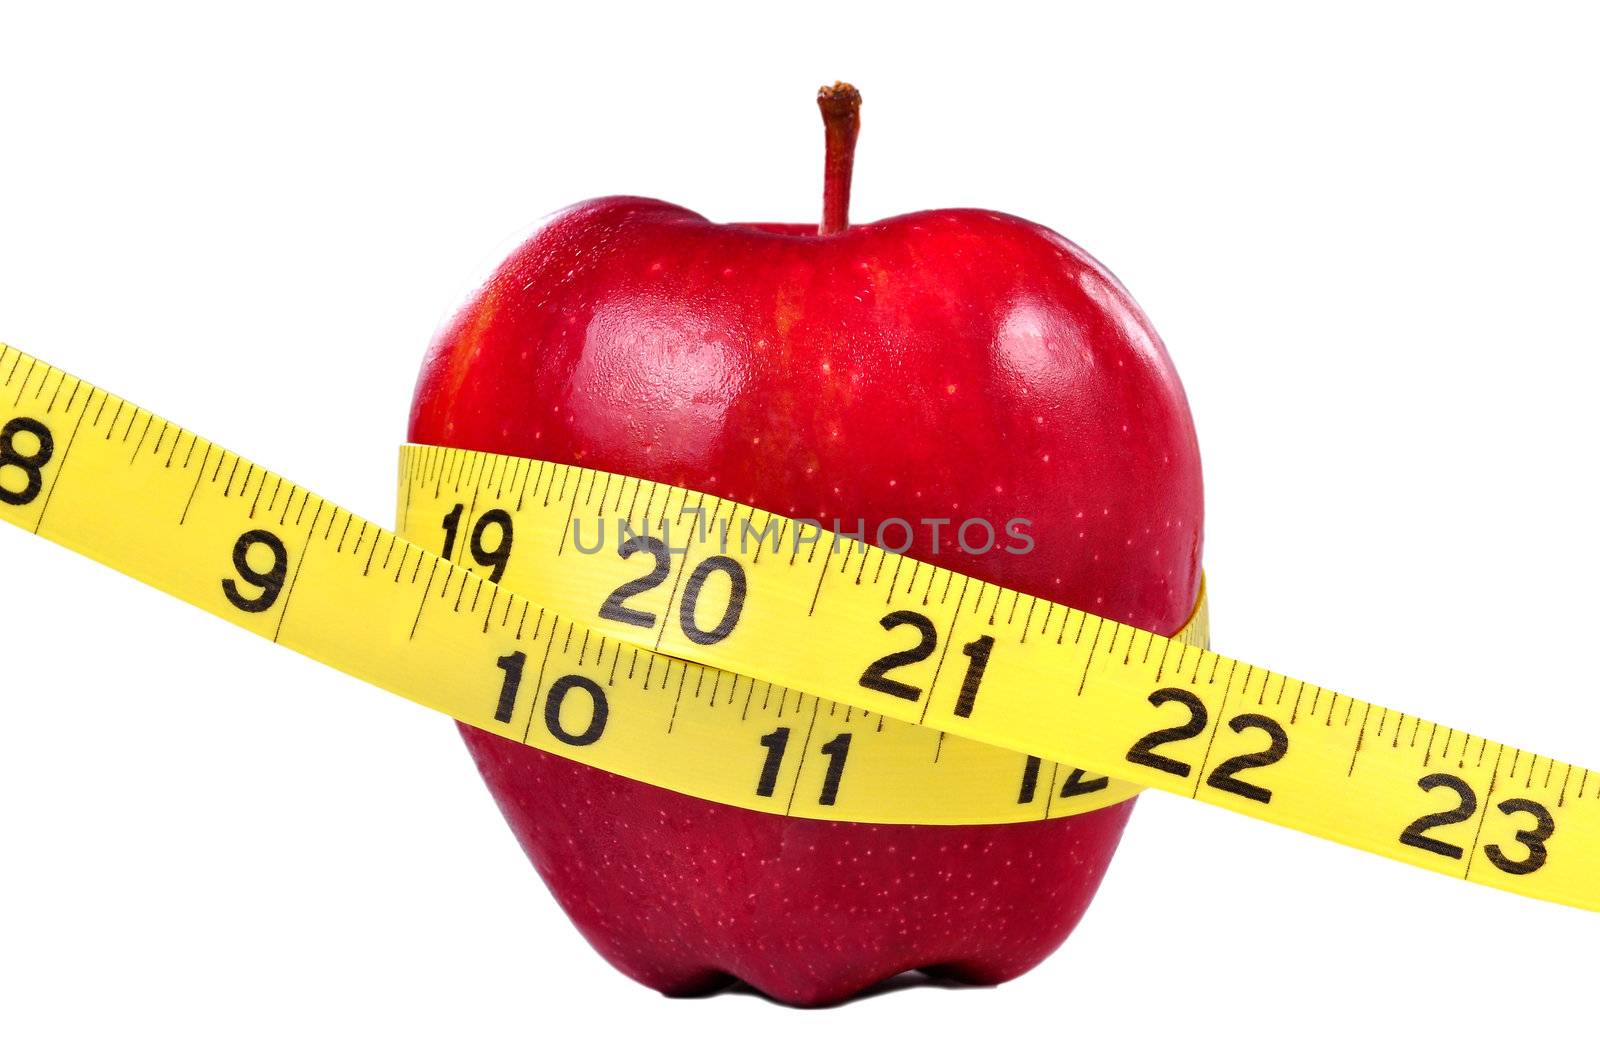 Red apple and yellow measuring tape to symbolize an healthy diet and body weight control.